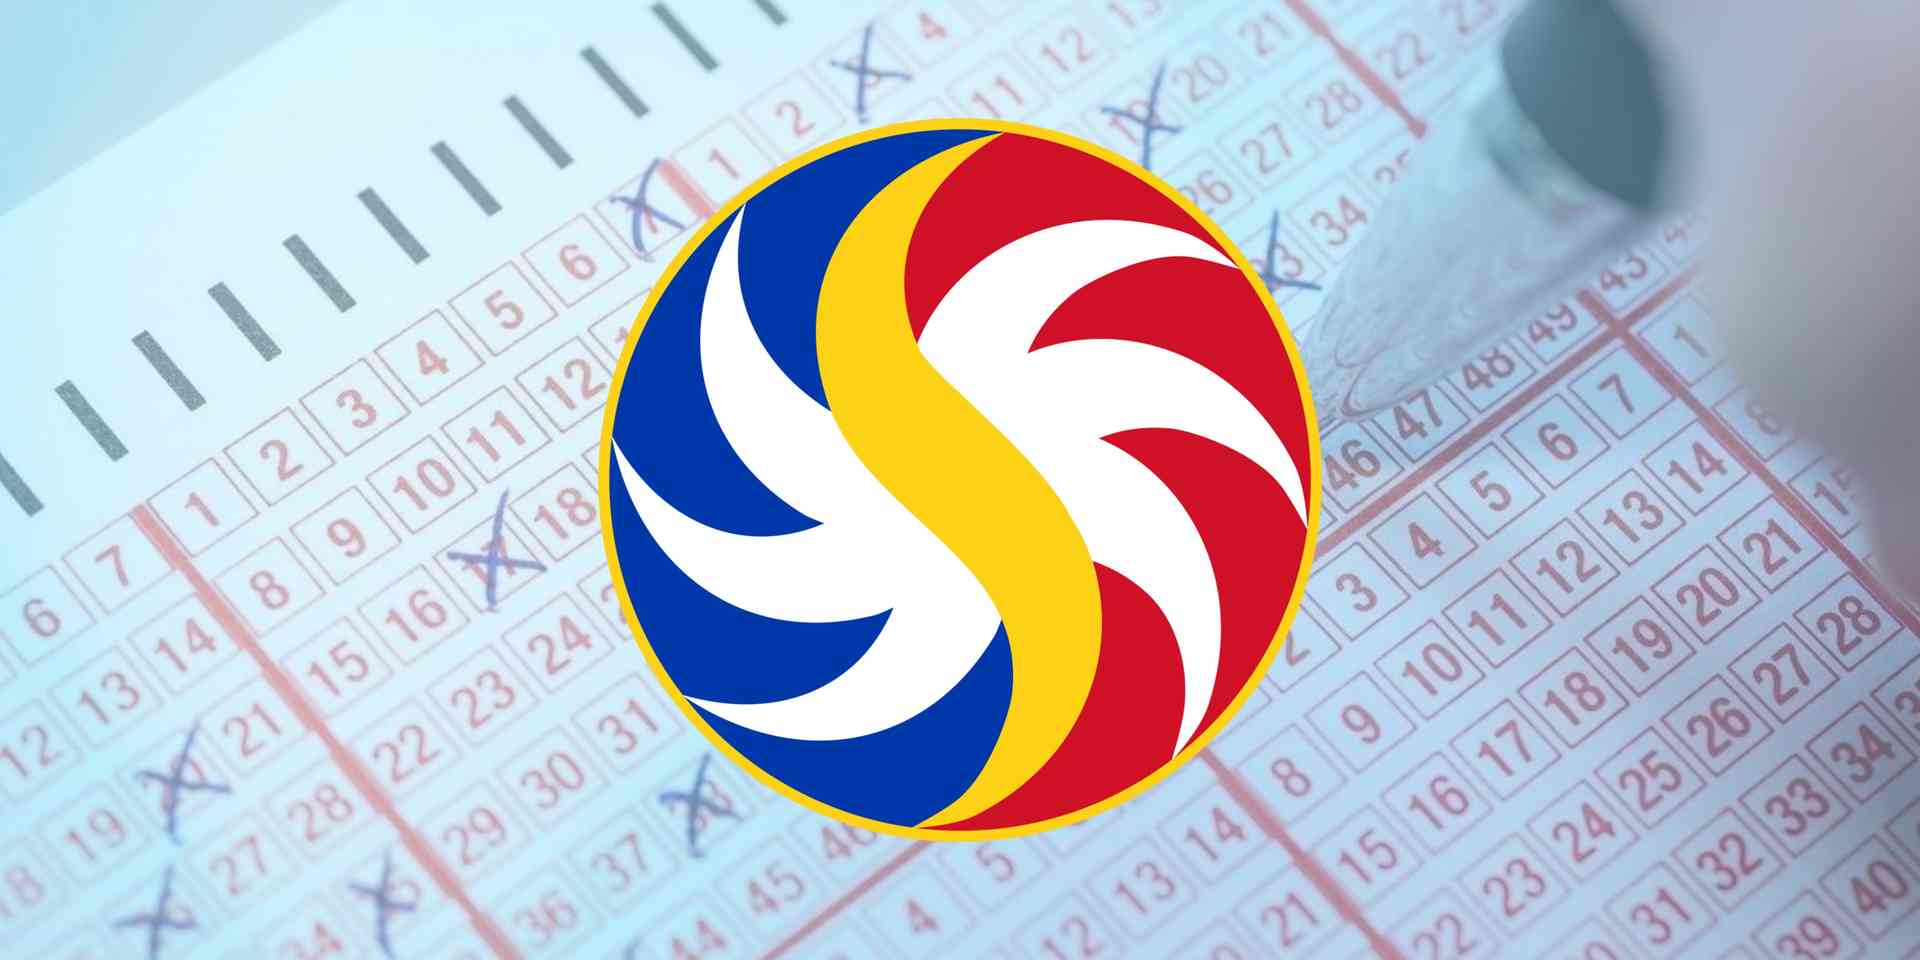 PCSO Lotto Draw Results on Wednesday, April 17